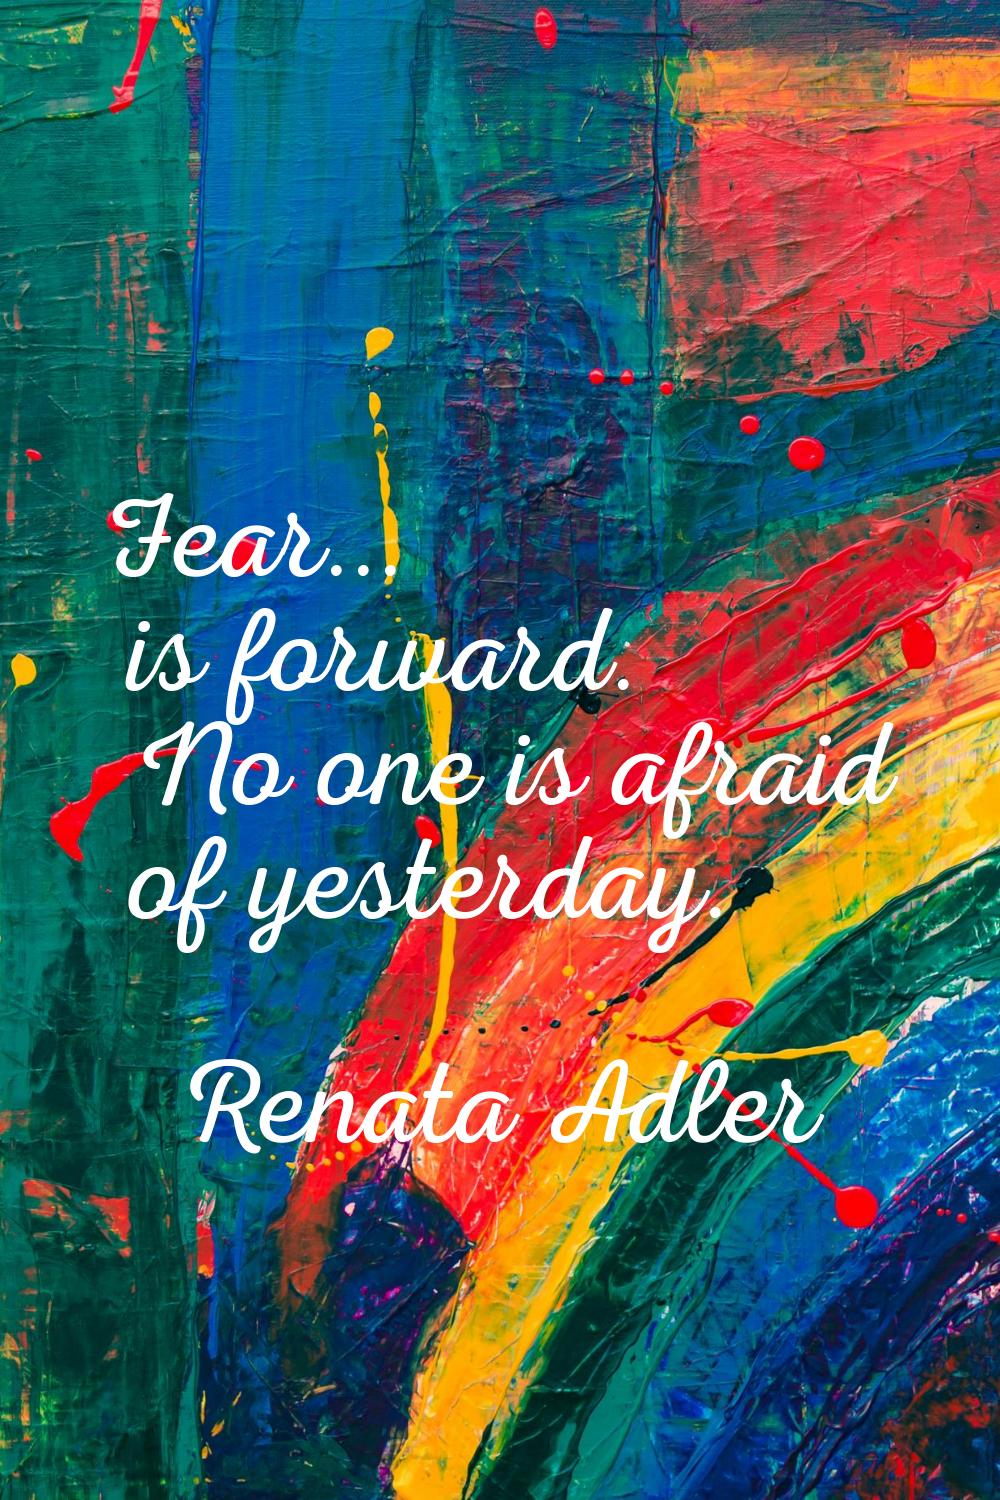 Fear... is forward. No one is afraid of yesterday.